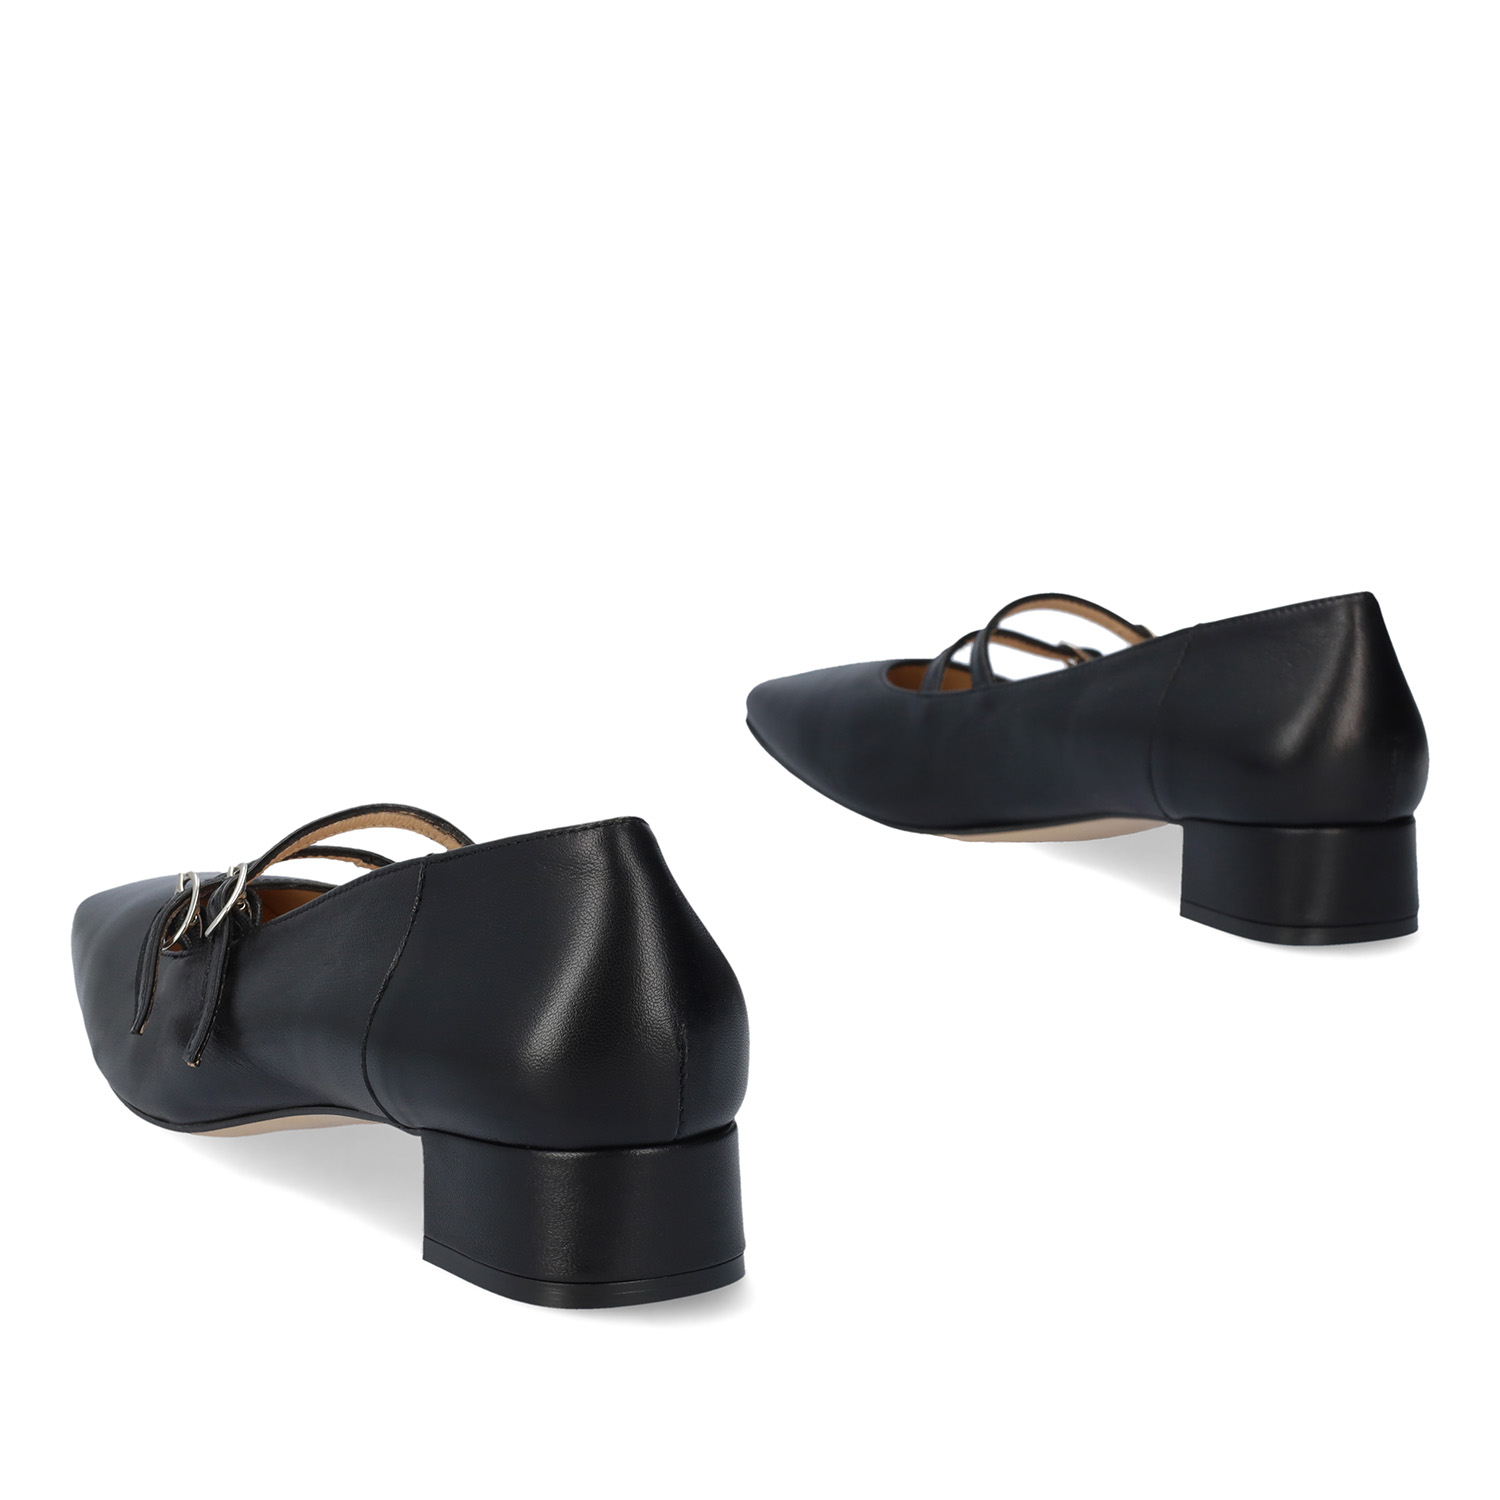 Heeled leather shoes in black colour. 